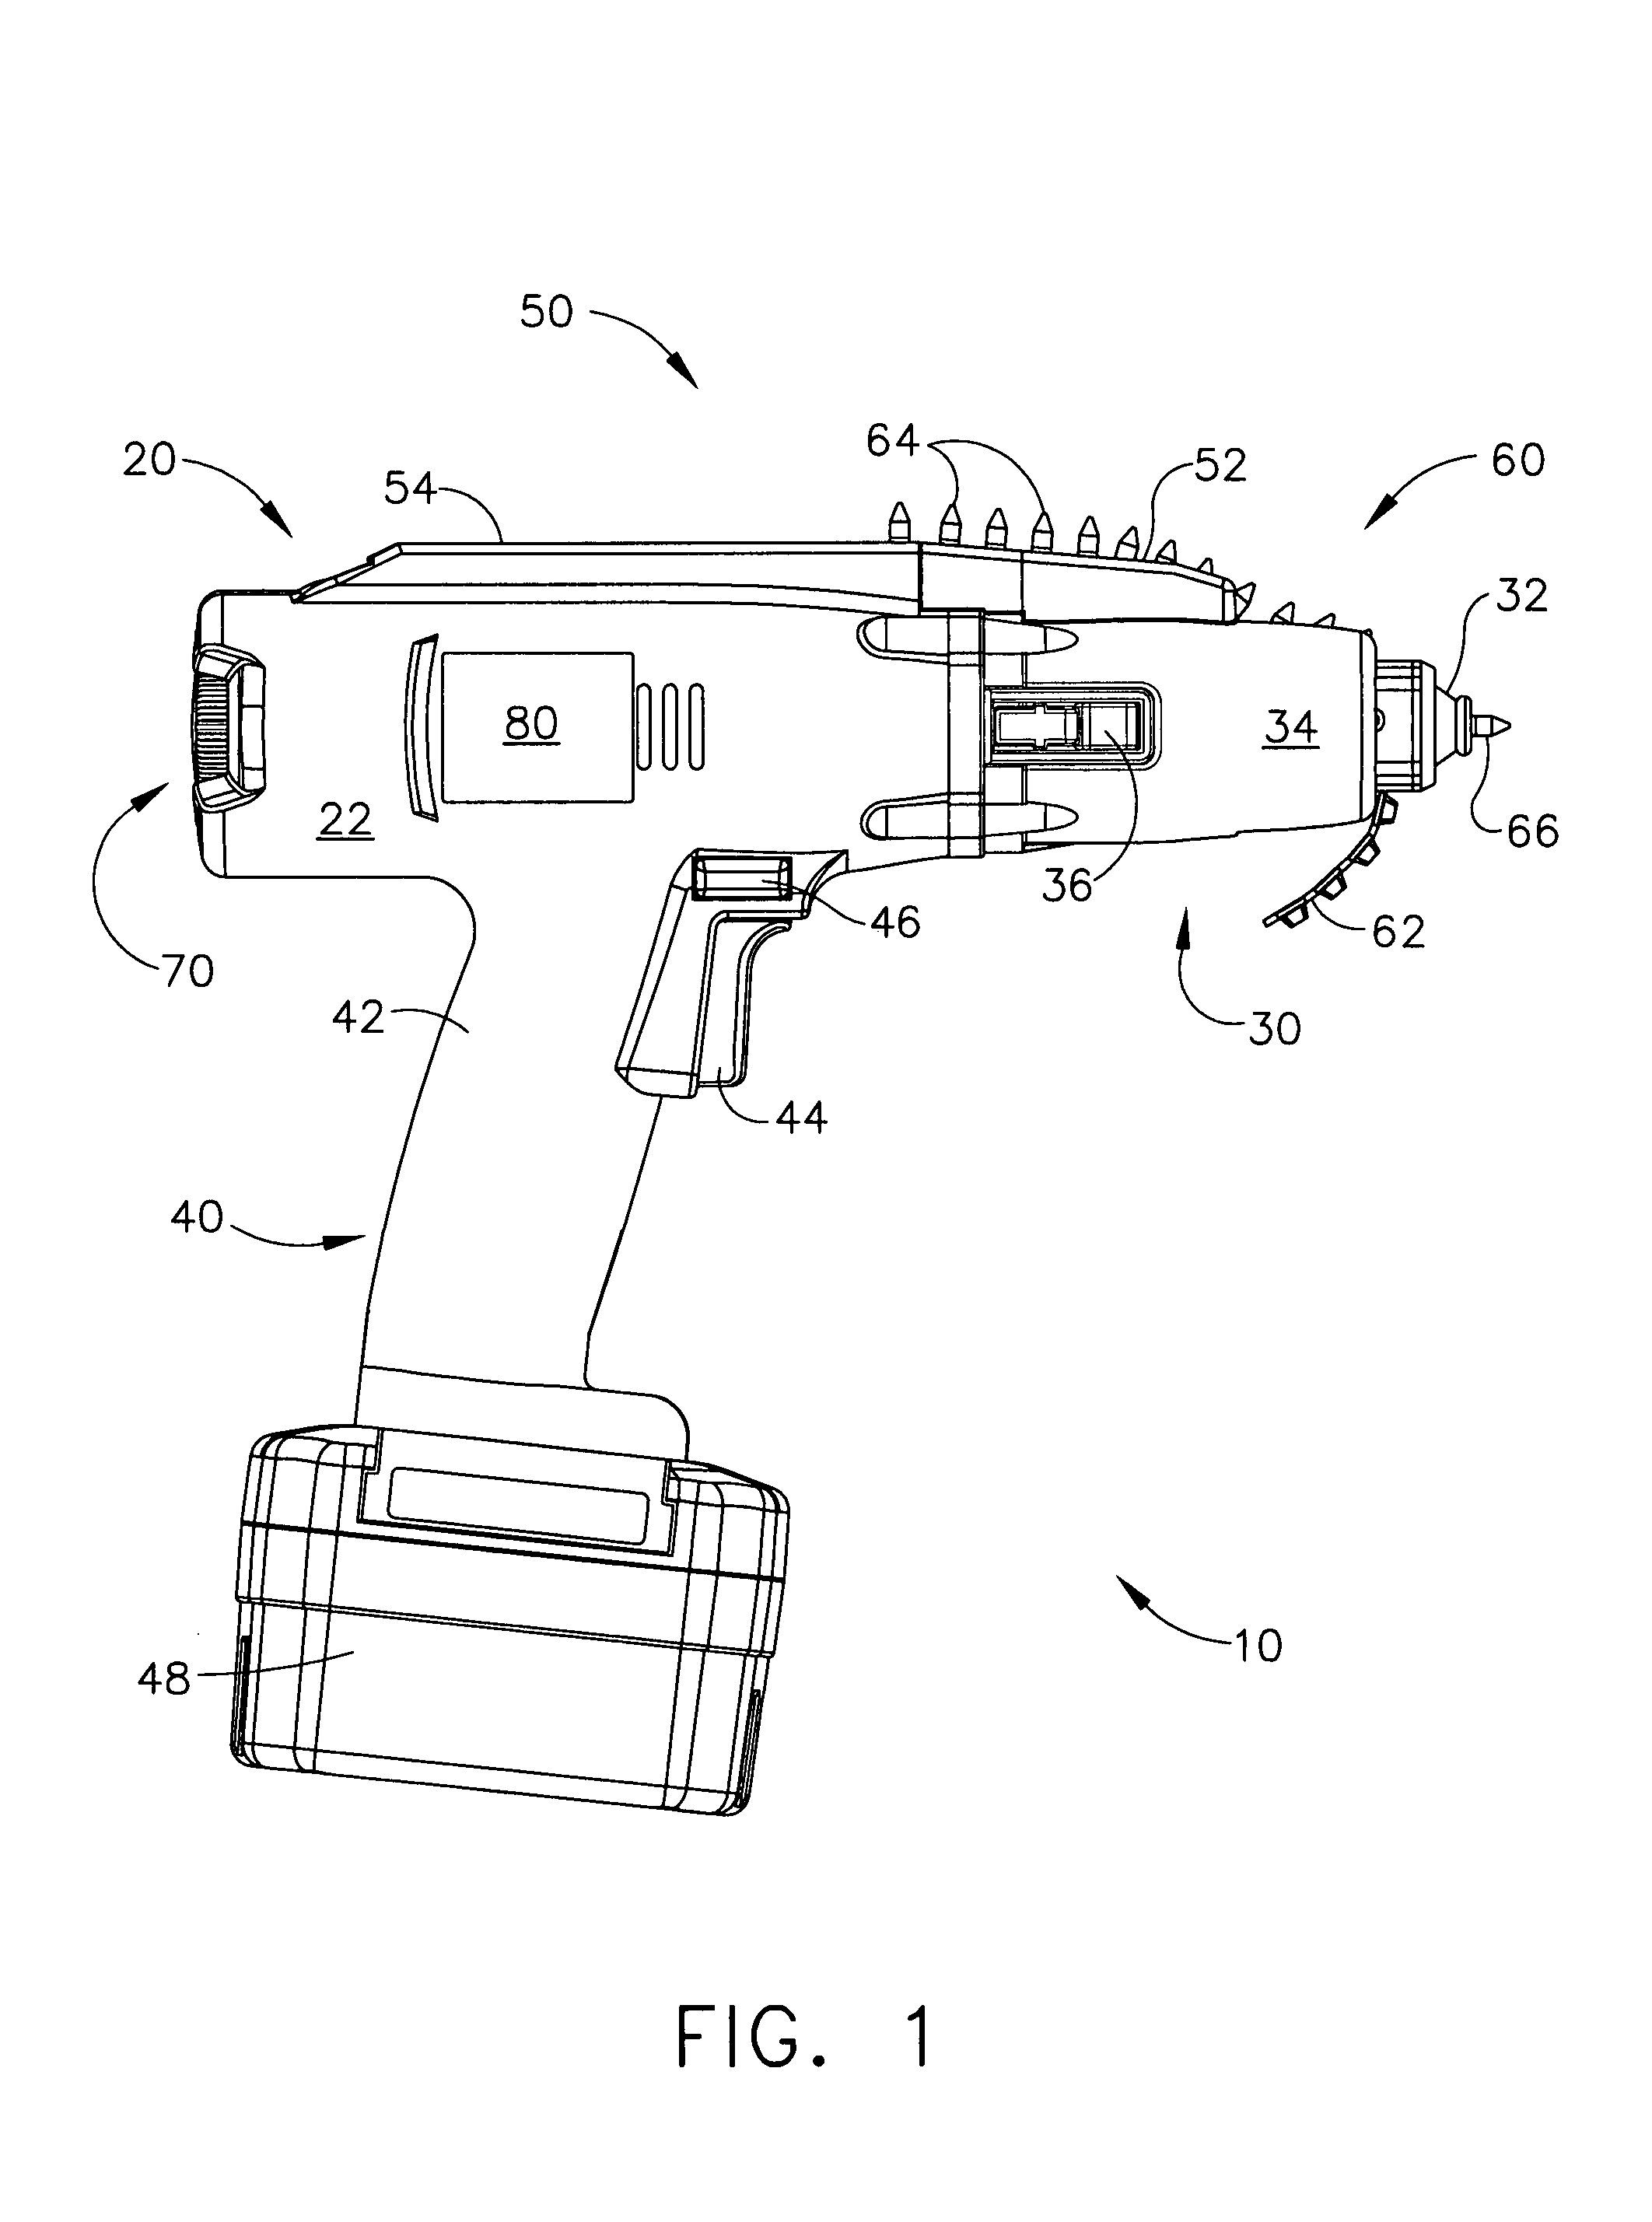 Apparatus for controlling a fastener driving tool, with user-adjustable torque limiting control